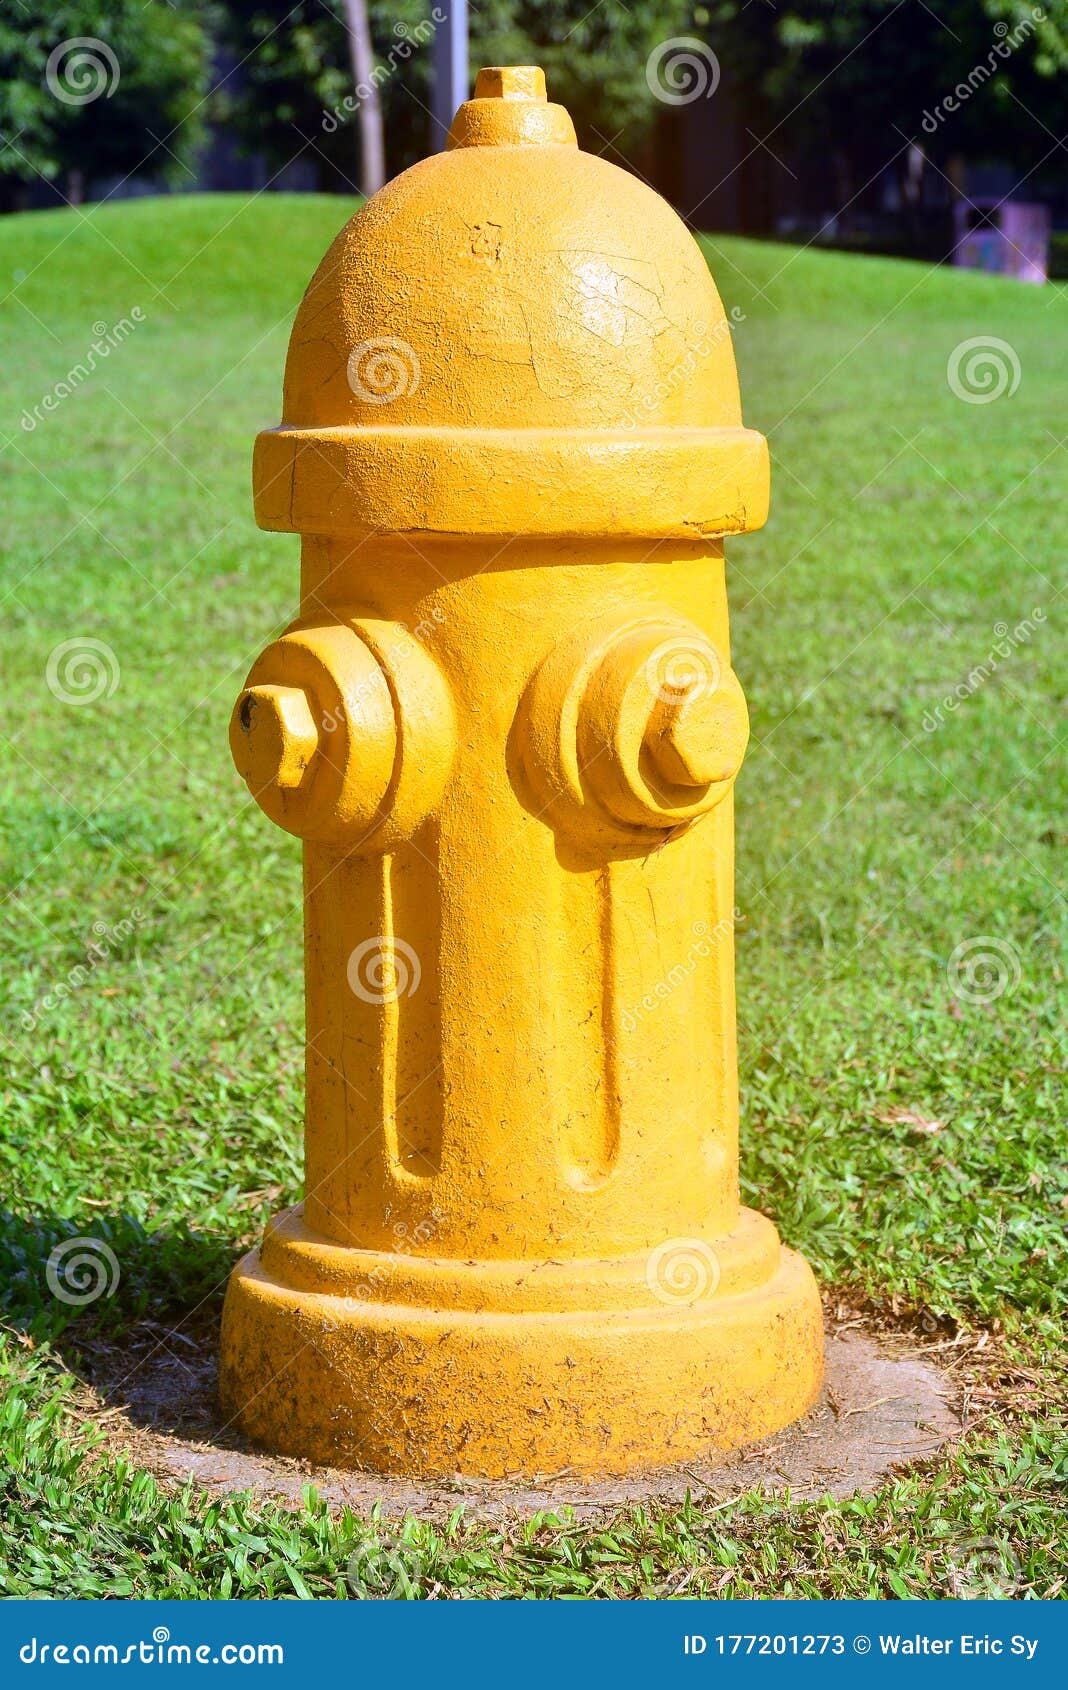 Yellow Fire Hydrant Reserve In The Park Stock Image ...
